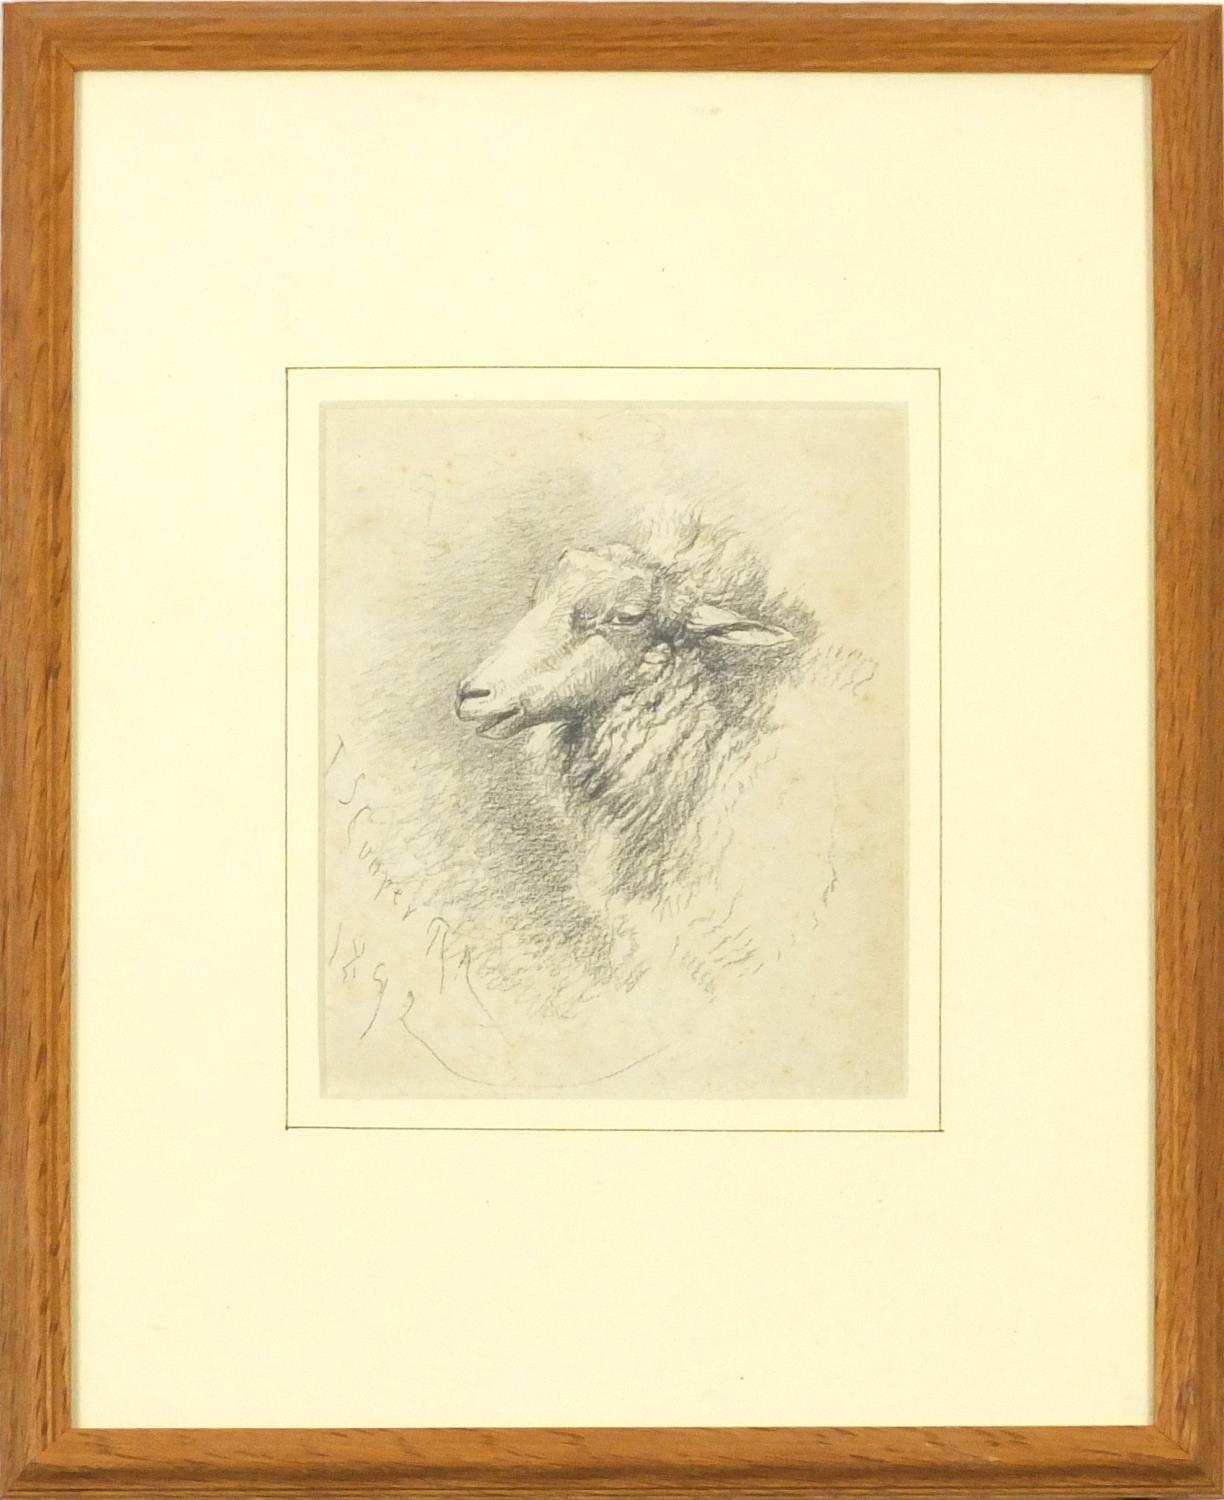 Thomas Sidney Cooper - Head of a sheep, late 19th century pencil on paper, mounted, framed and - Image 2 of 4